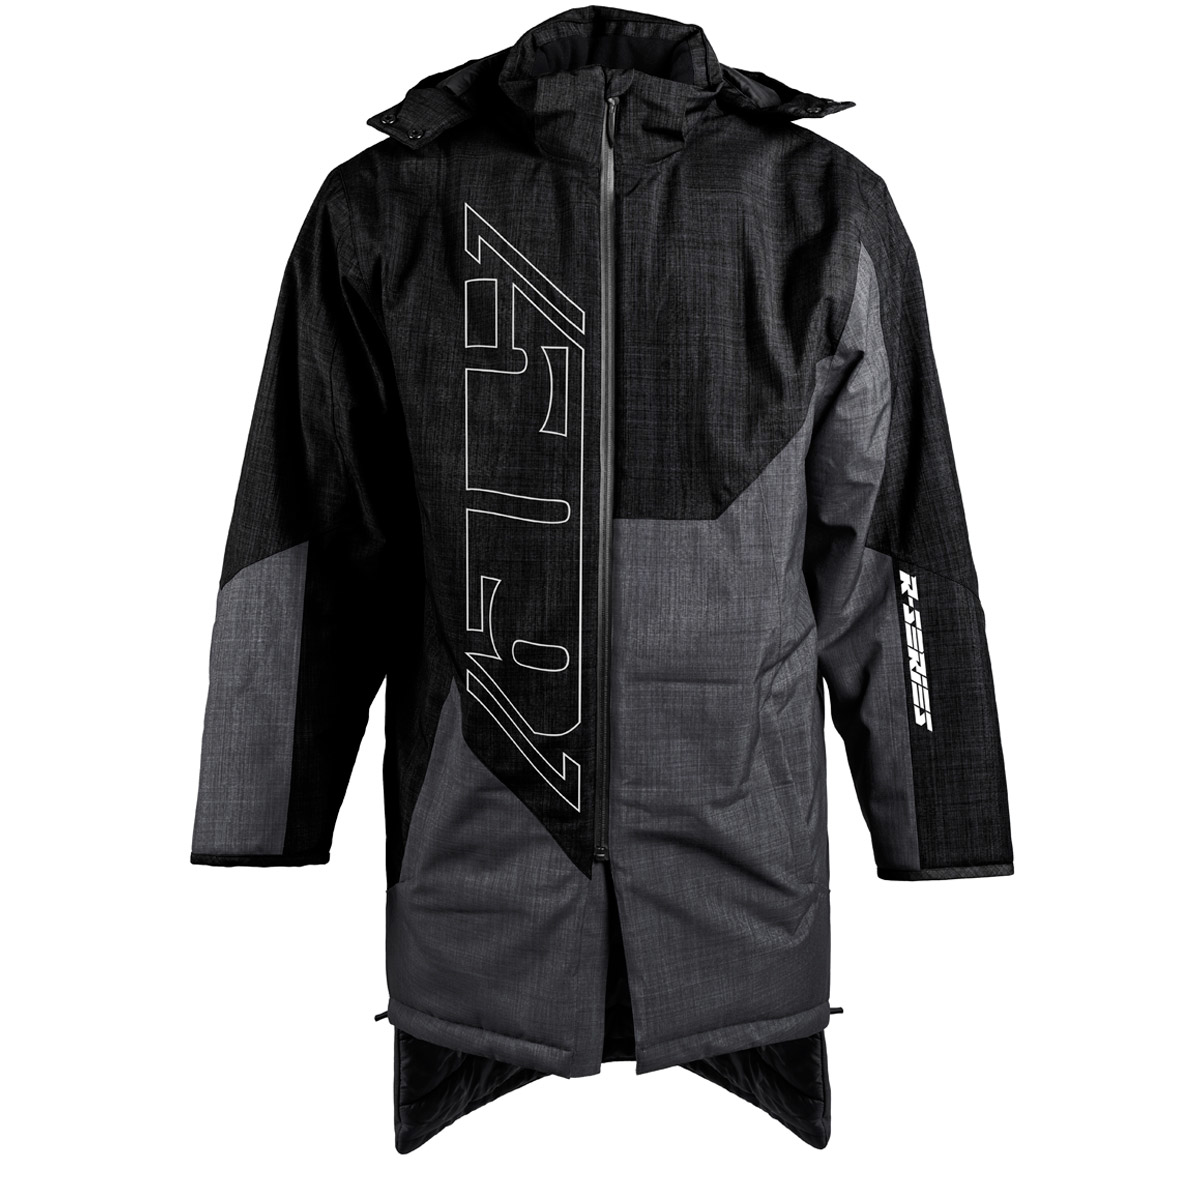 509 insulated jackets for men r series pit coat